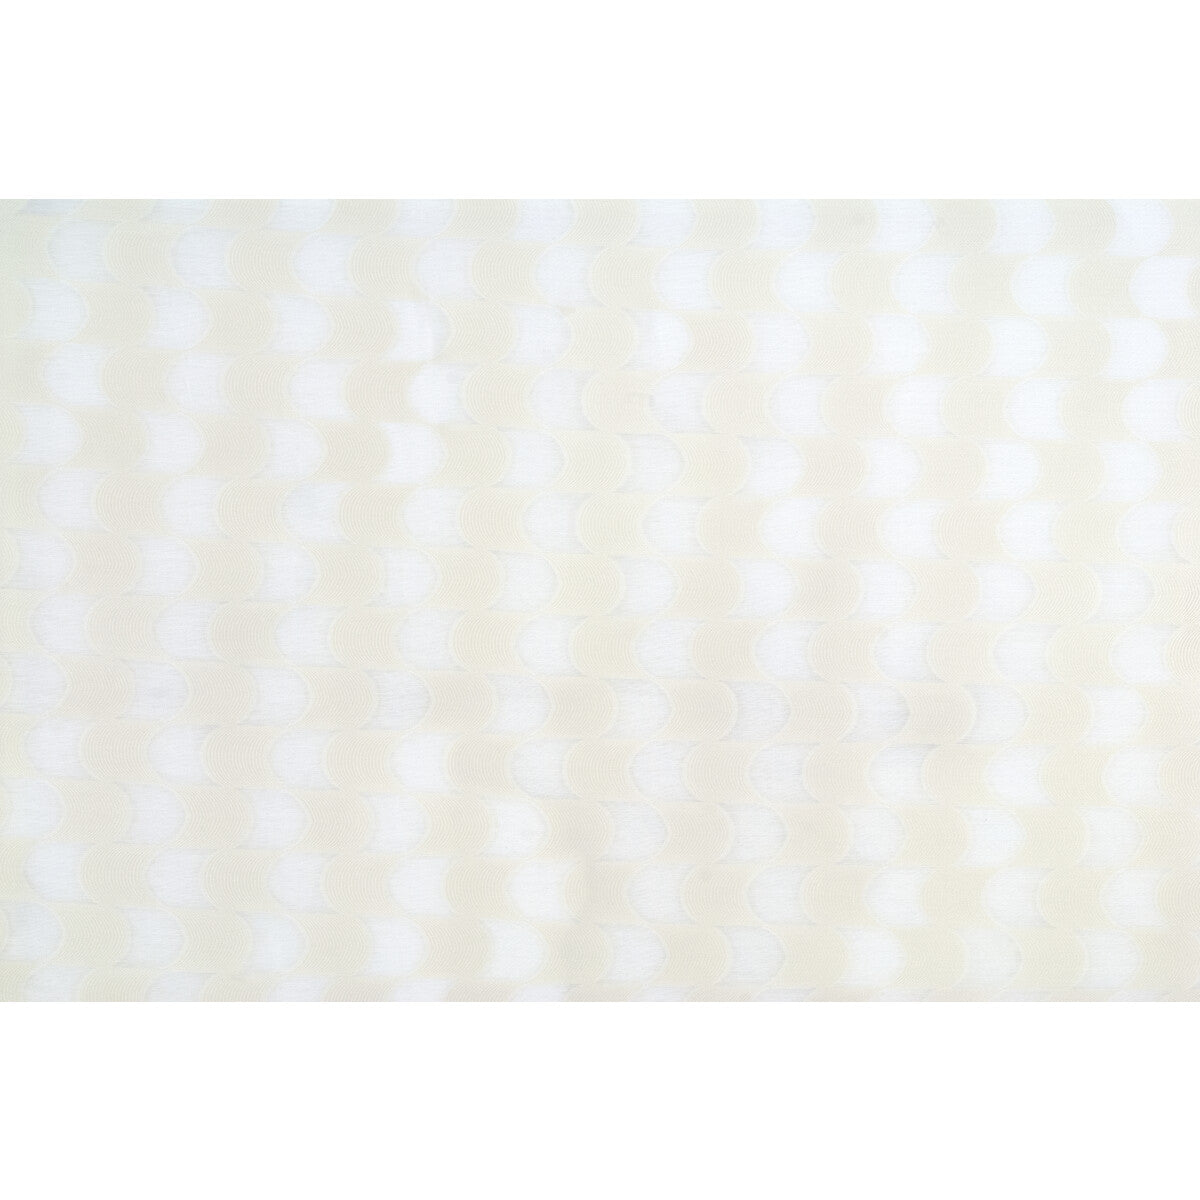 Celina fabric in pearl color - pattern 4285.1.0 - by Kravet Contract